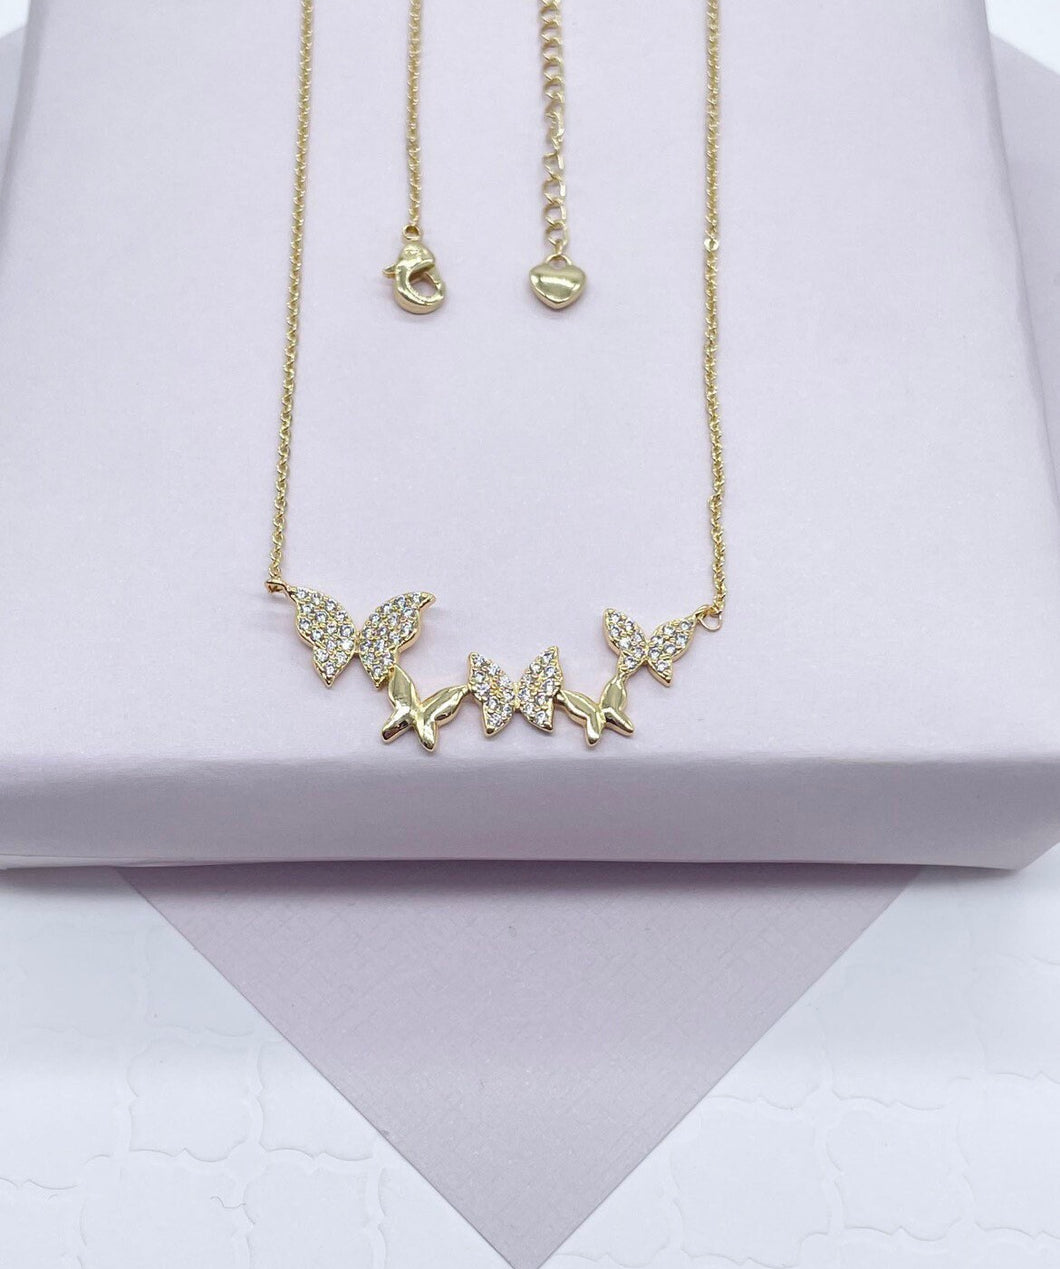 18k Gold Filled Butterfly Necklaces Featuring Micro Pave Cubic Zirconia Butterflies And Plain Gold Butterfly Jewelry